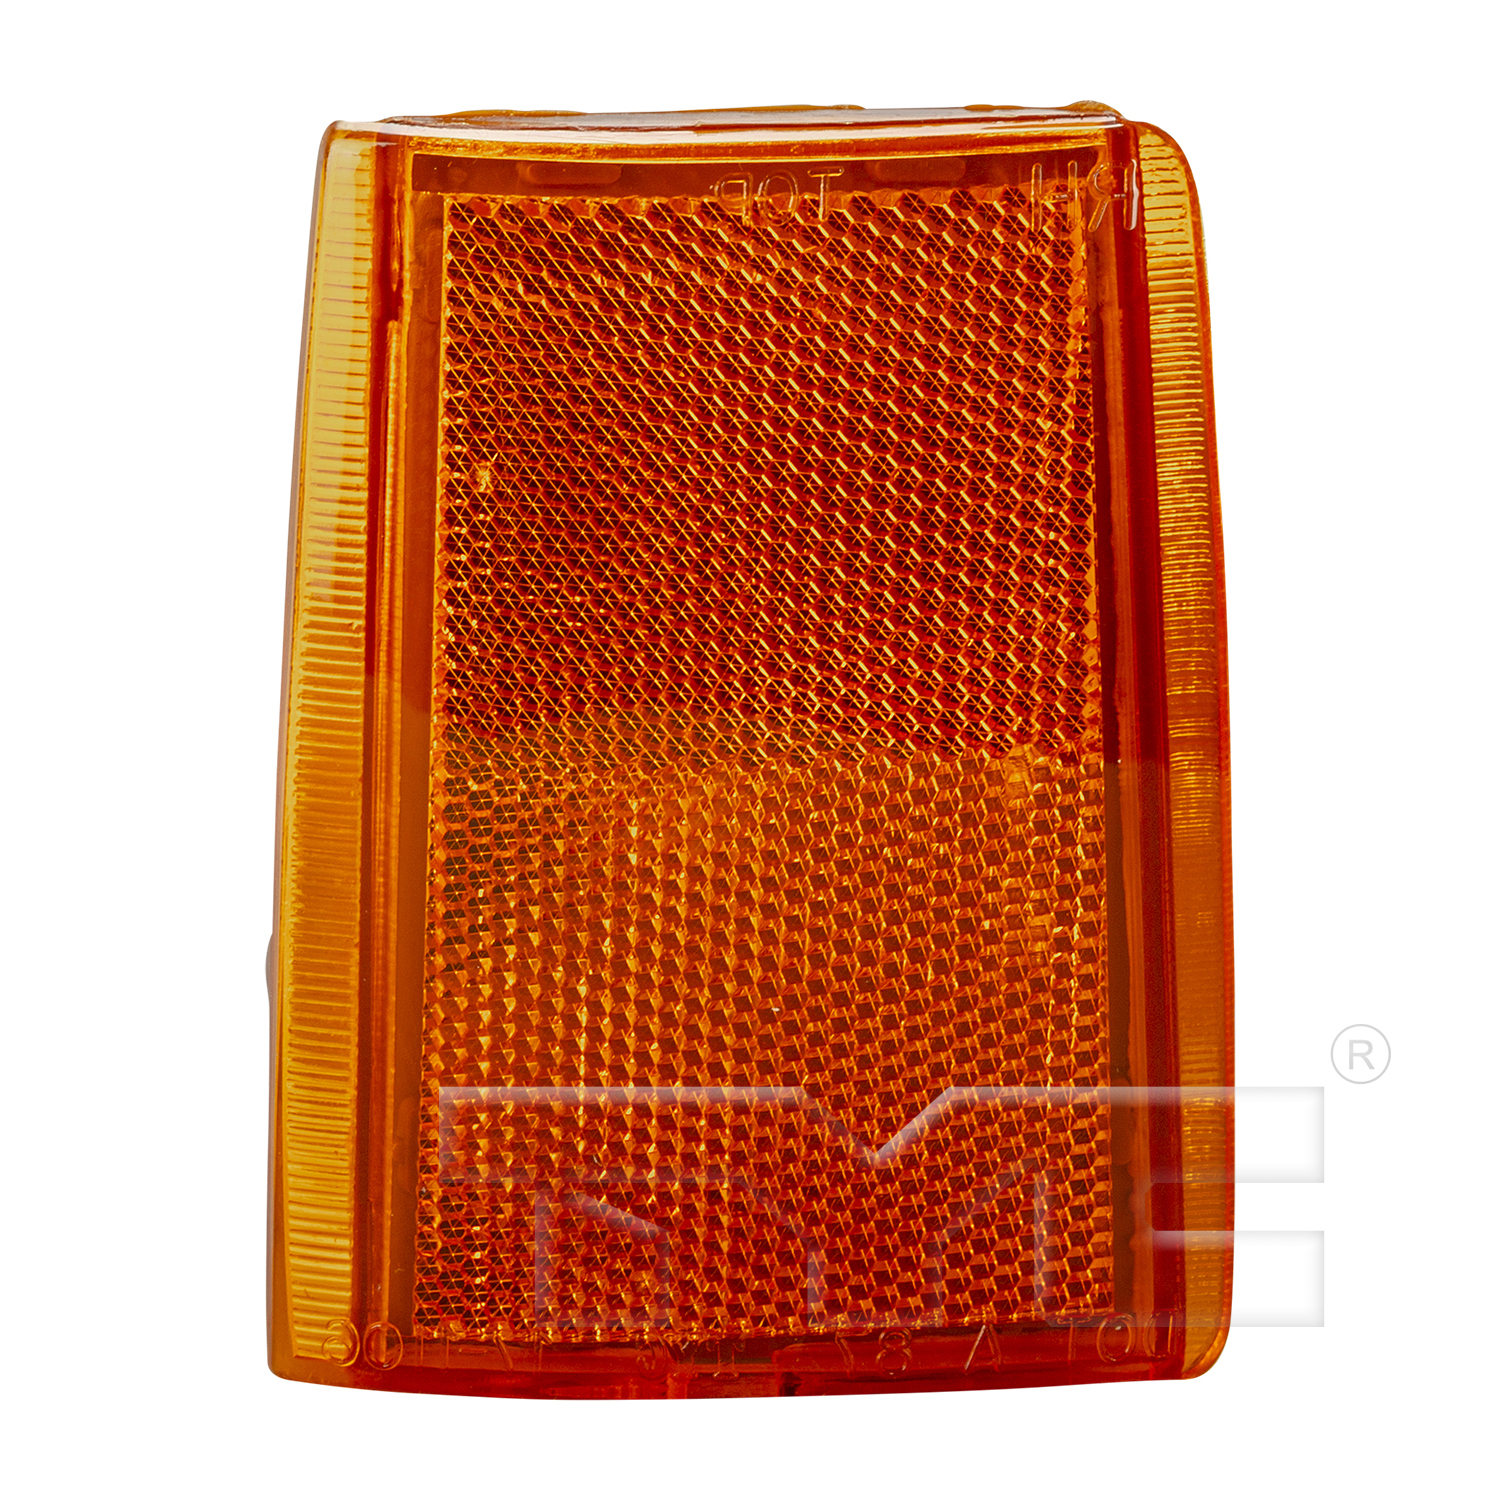 Aftermarket LAMPS for CHEVROLET - C1500 SUBURBAN, C1500 SUBURBAN,92-93,LT Front side reflector